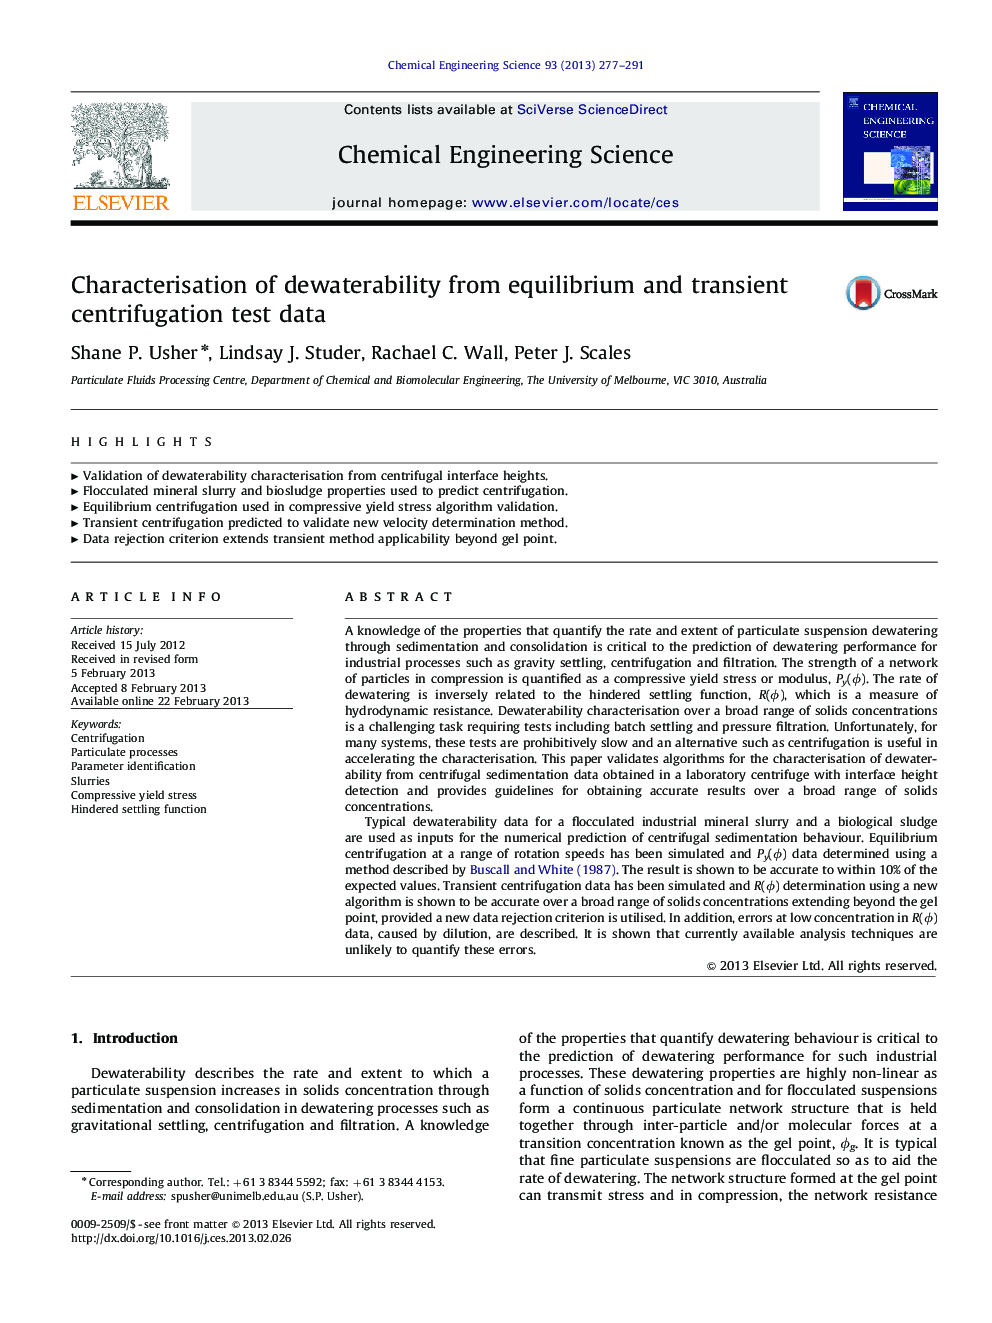 Characterisation of dewaterability from equilibrium and transient centrifugation test data